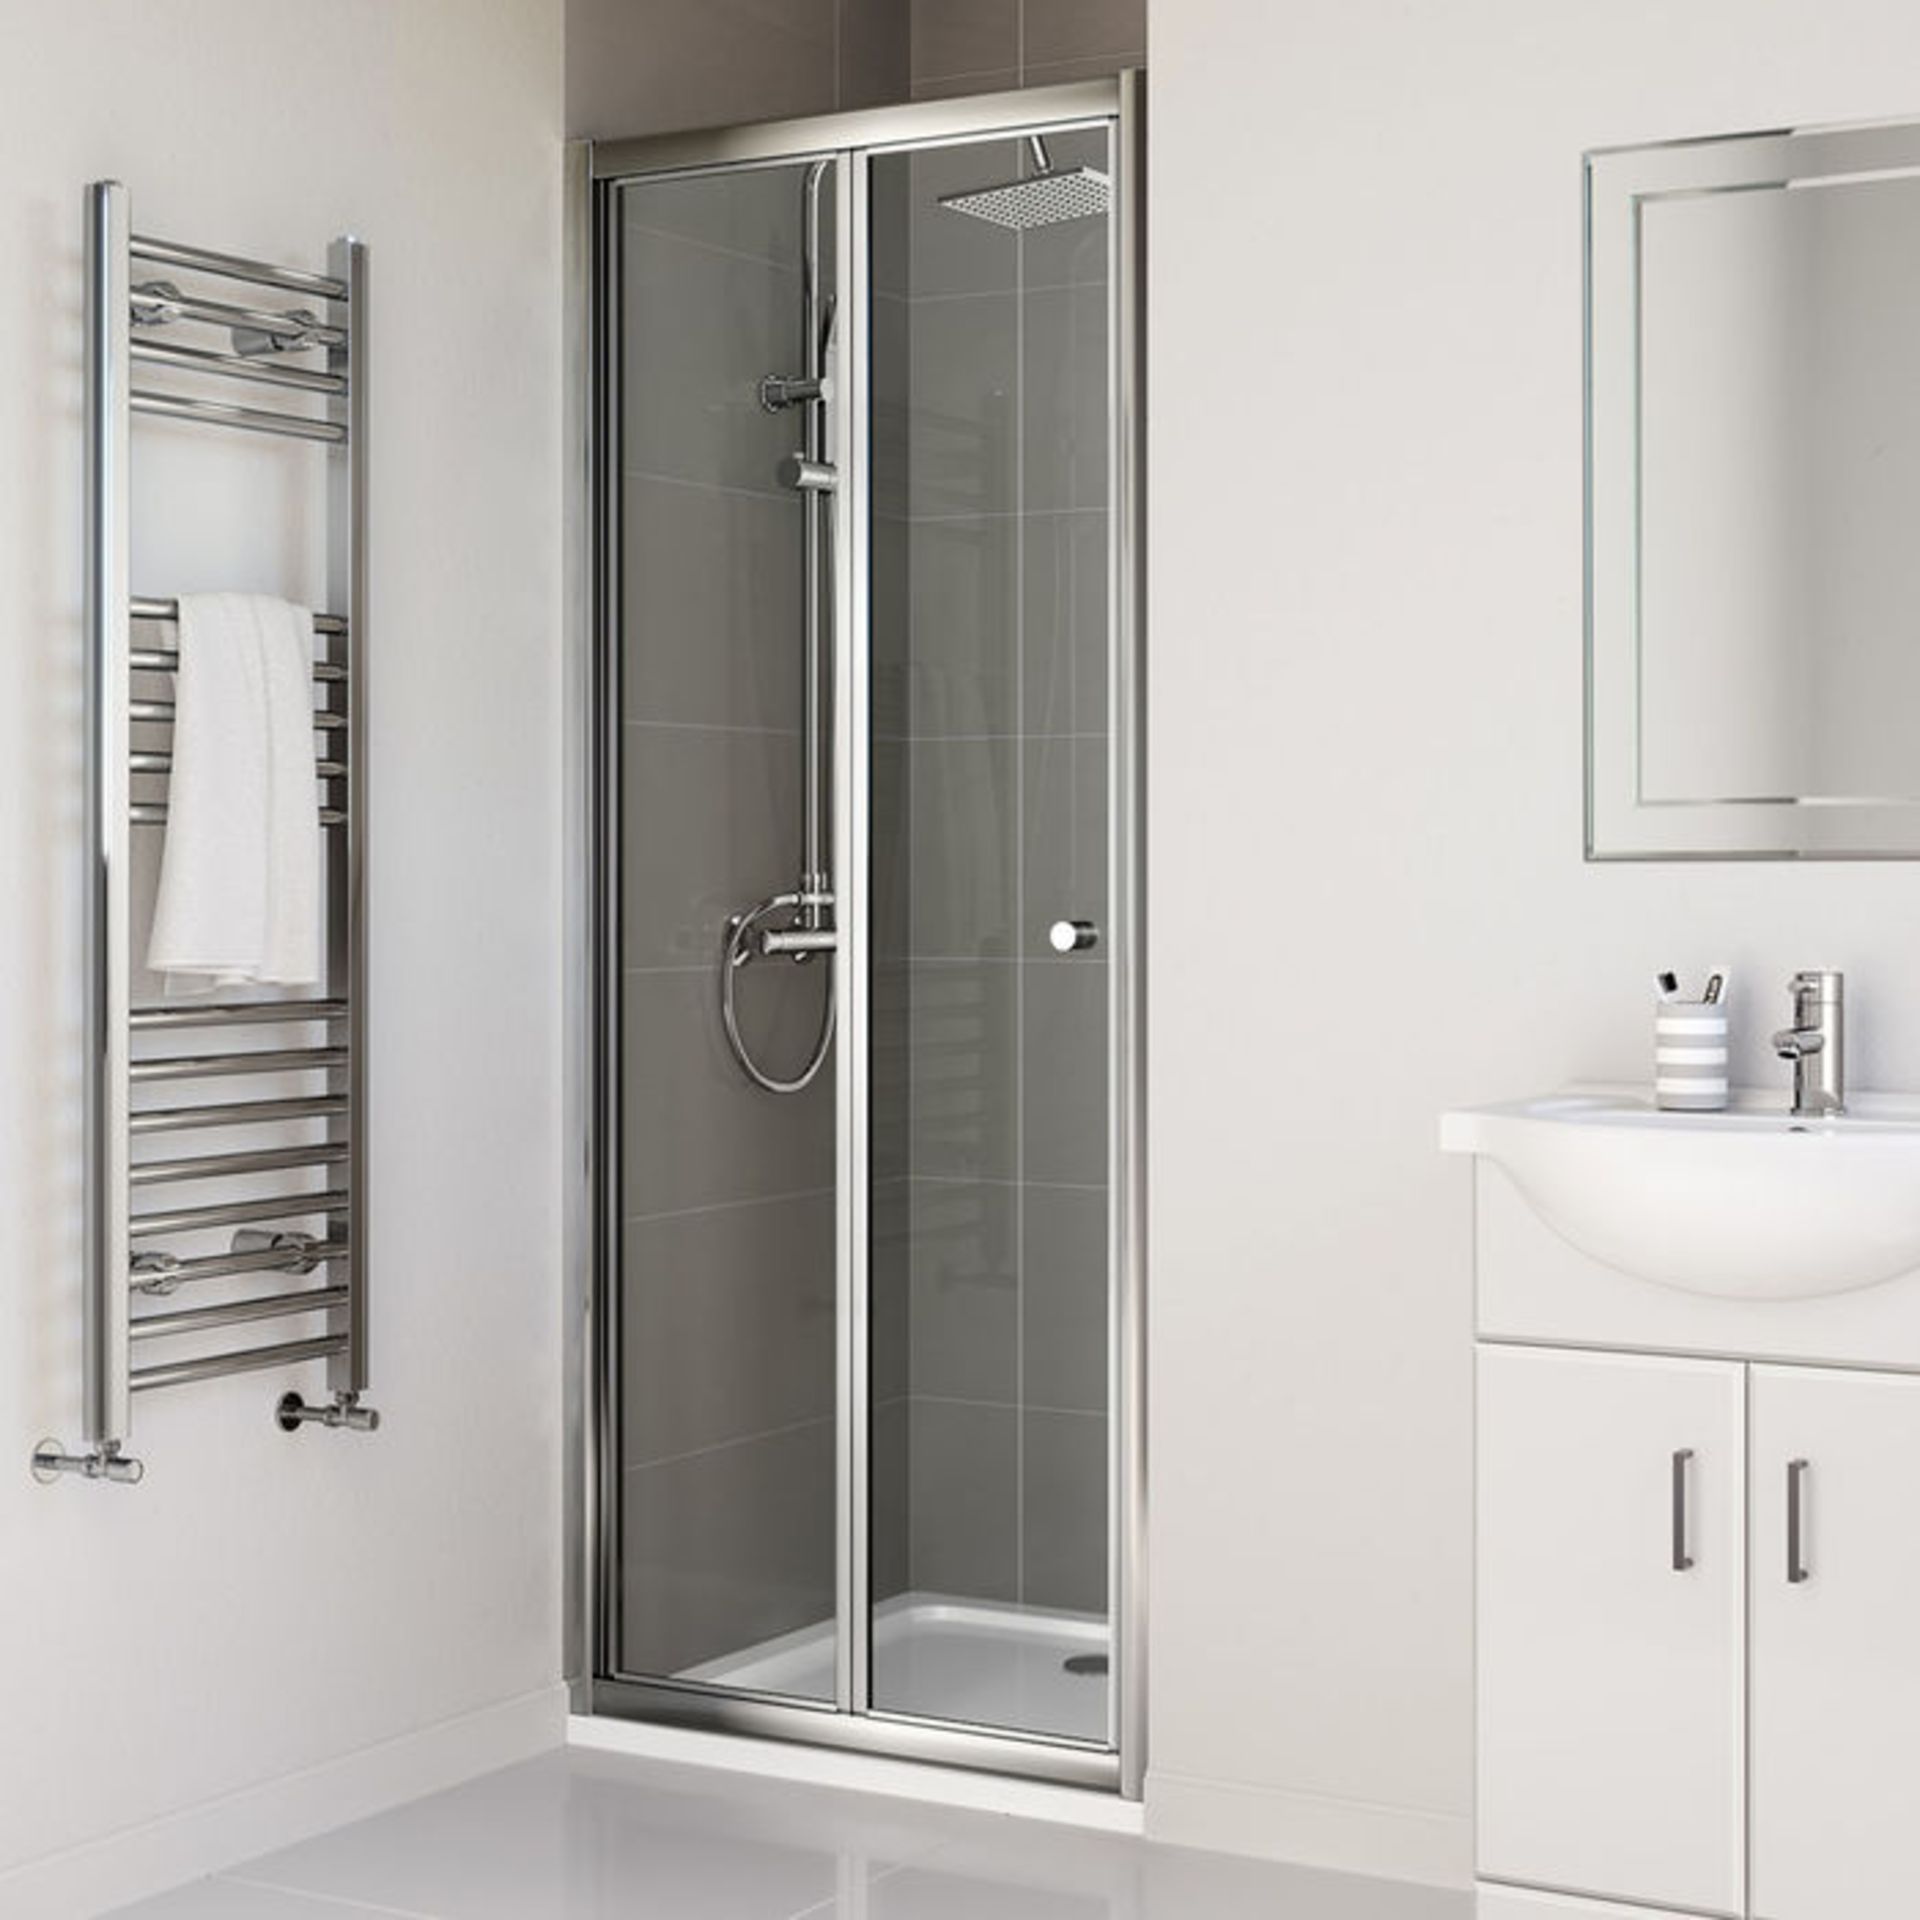 (PO14) 700mm - Elements Bi Fold Shower Door. RRP £299.99.4mm Safety GlassFully waterproof tested